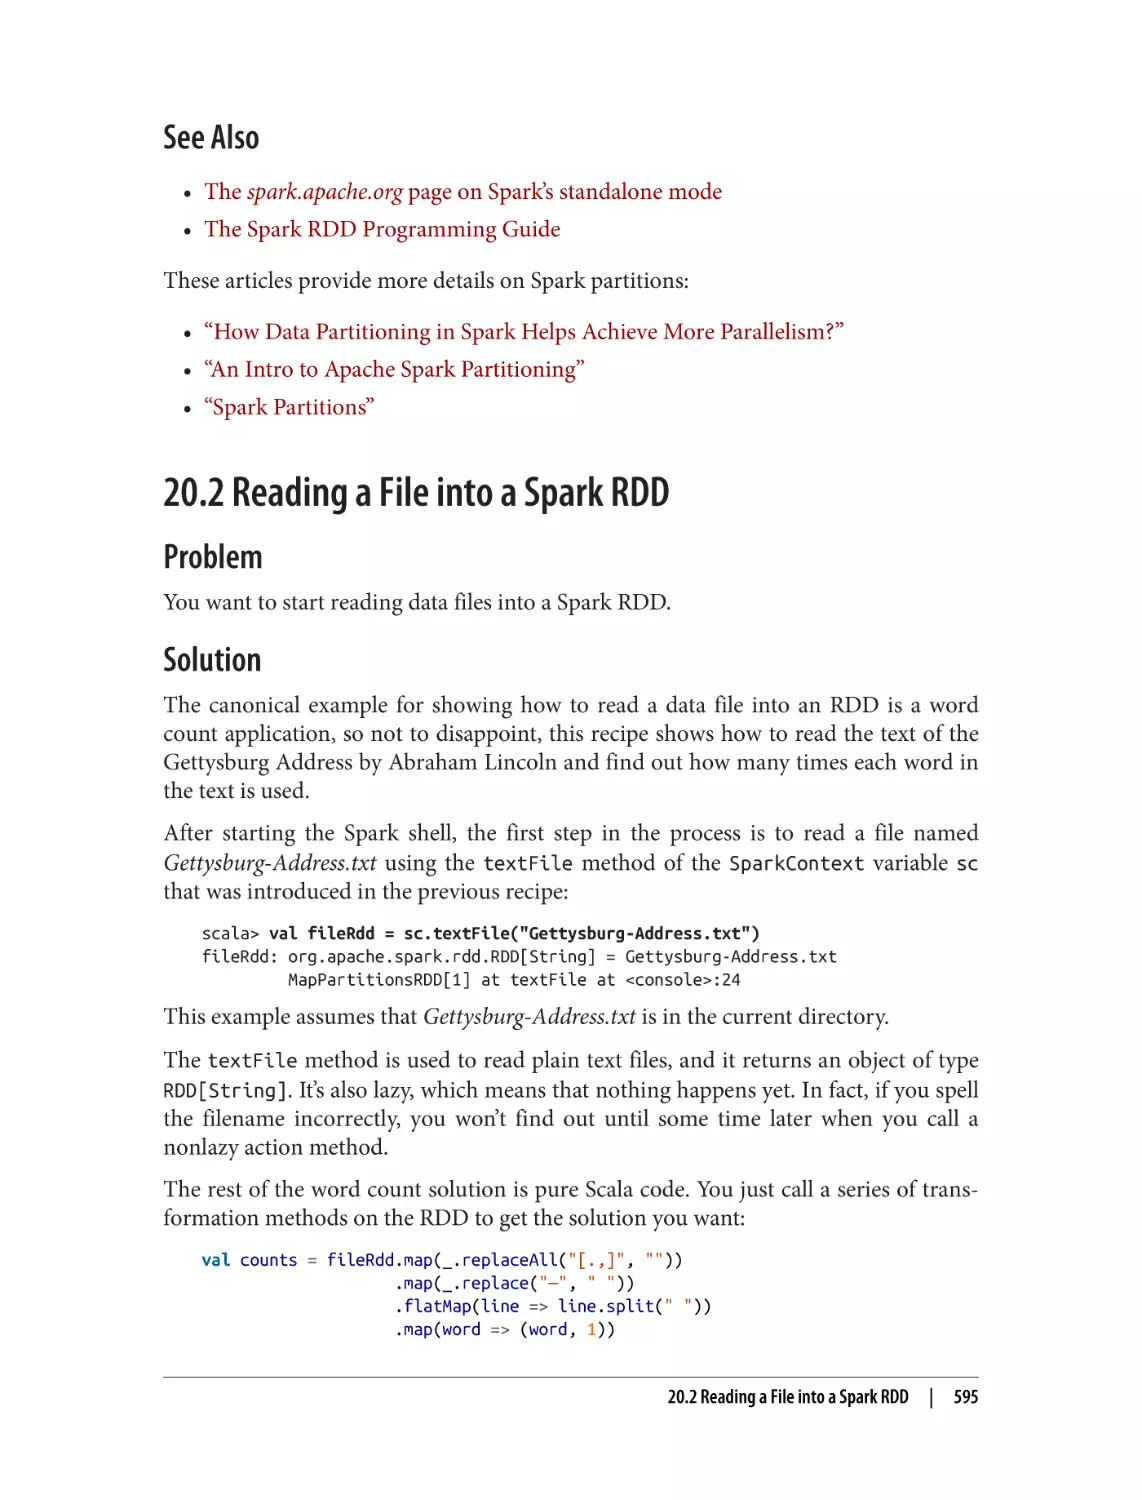 See Also
20.2 Reading a File into a Spark RDD
Problem
Solution